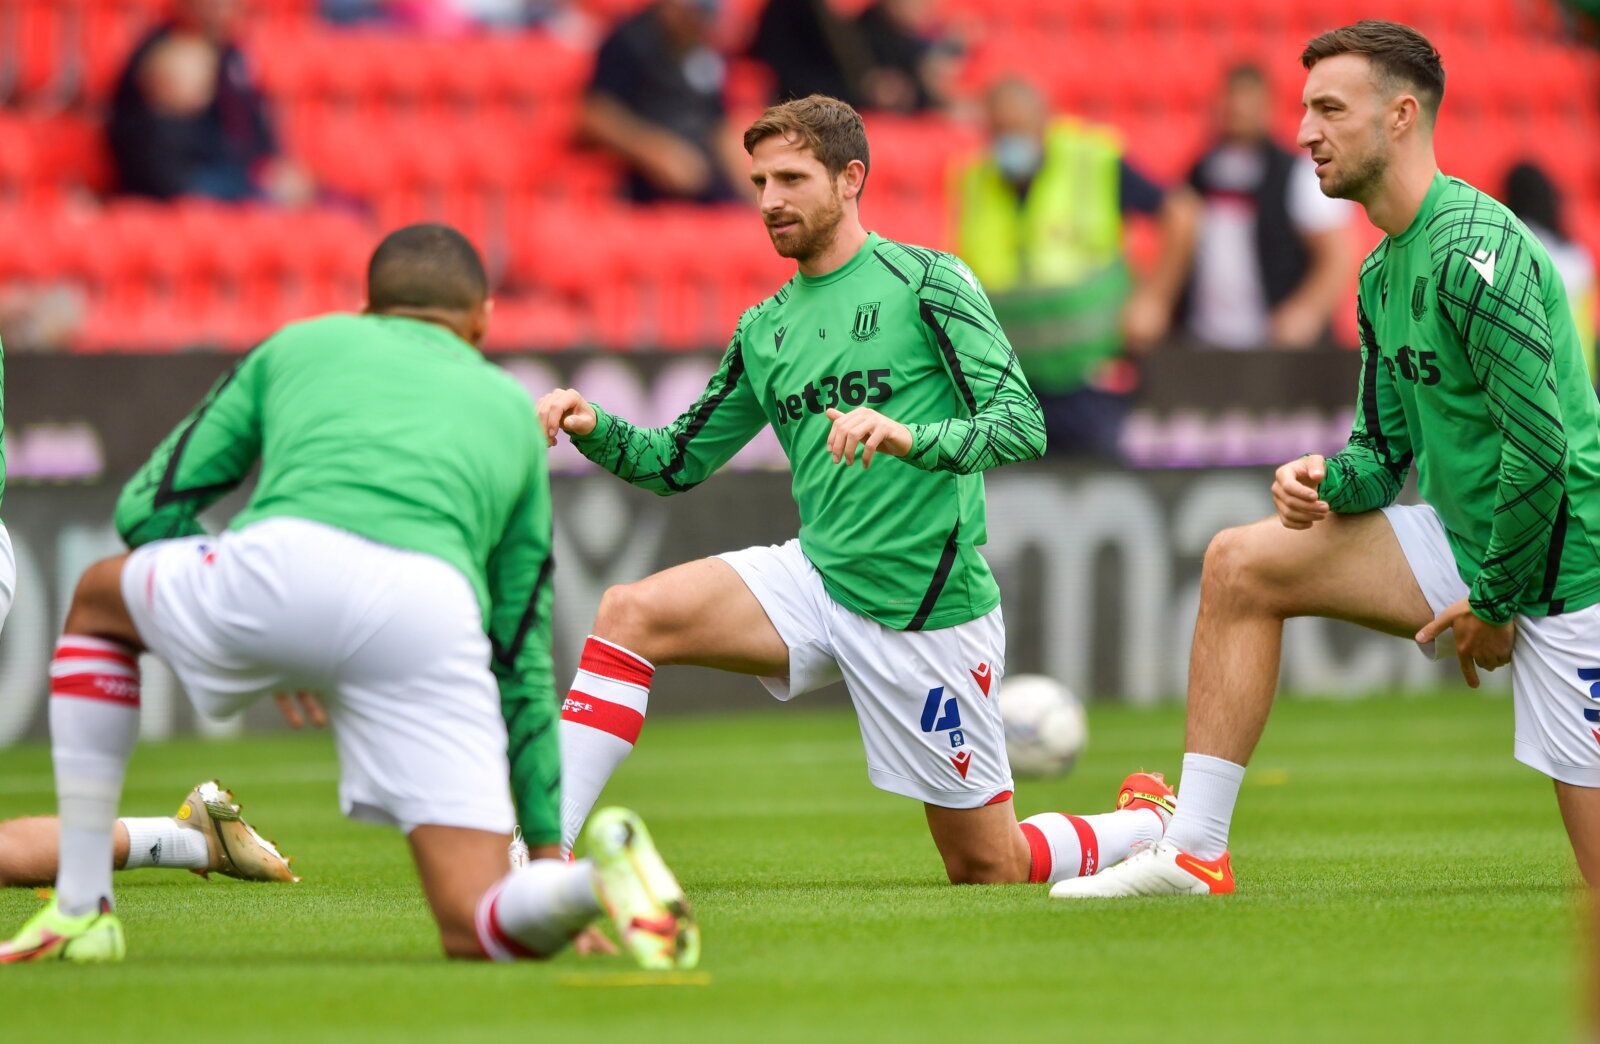 Soccer Football - Championship - Stoke City v Huddersfield Town - bet365 Stadium, Stoke-on-Trent, Britain - September 11, 2021 Stoke City's Joe Allen during the warm up before the match  Action Images/Paul Burrows  EDITORIAL USE ONLY. No use with unauthorized audio, video, data, fixture lists, club/league logos or 